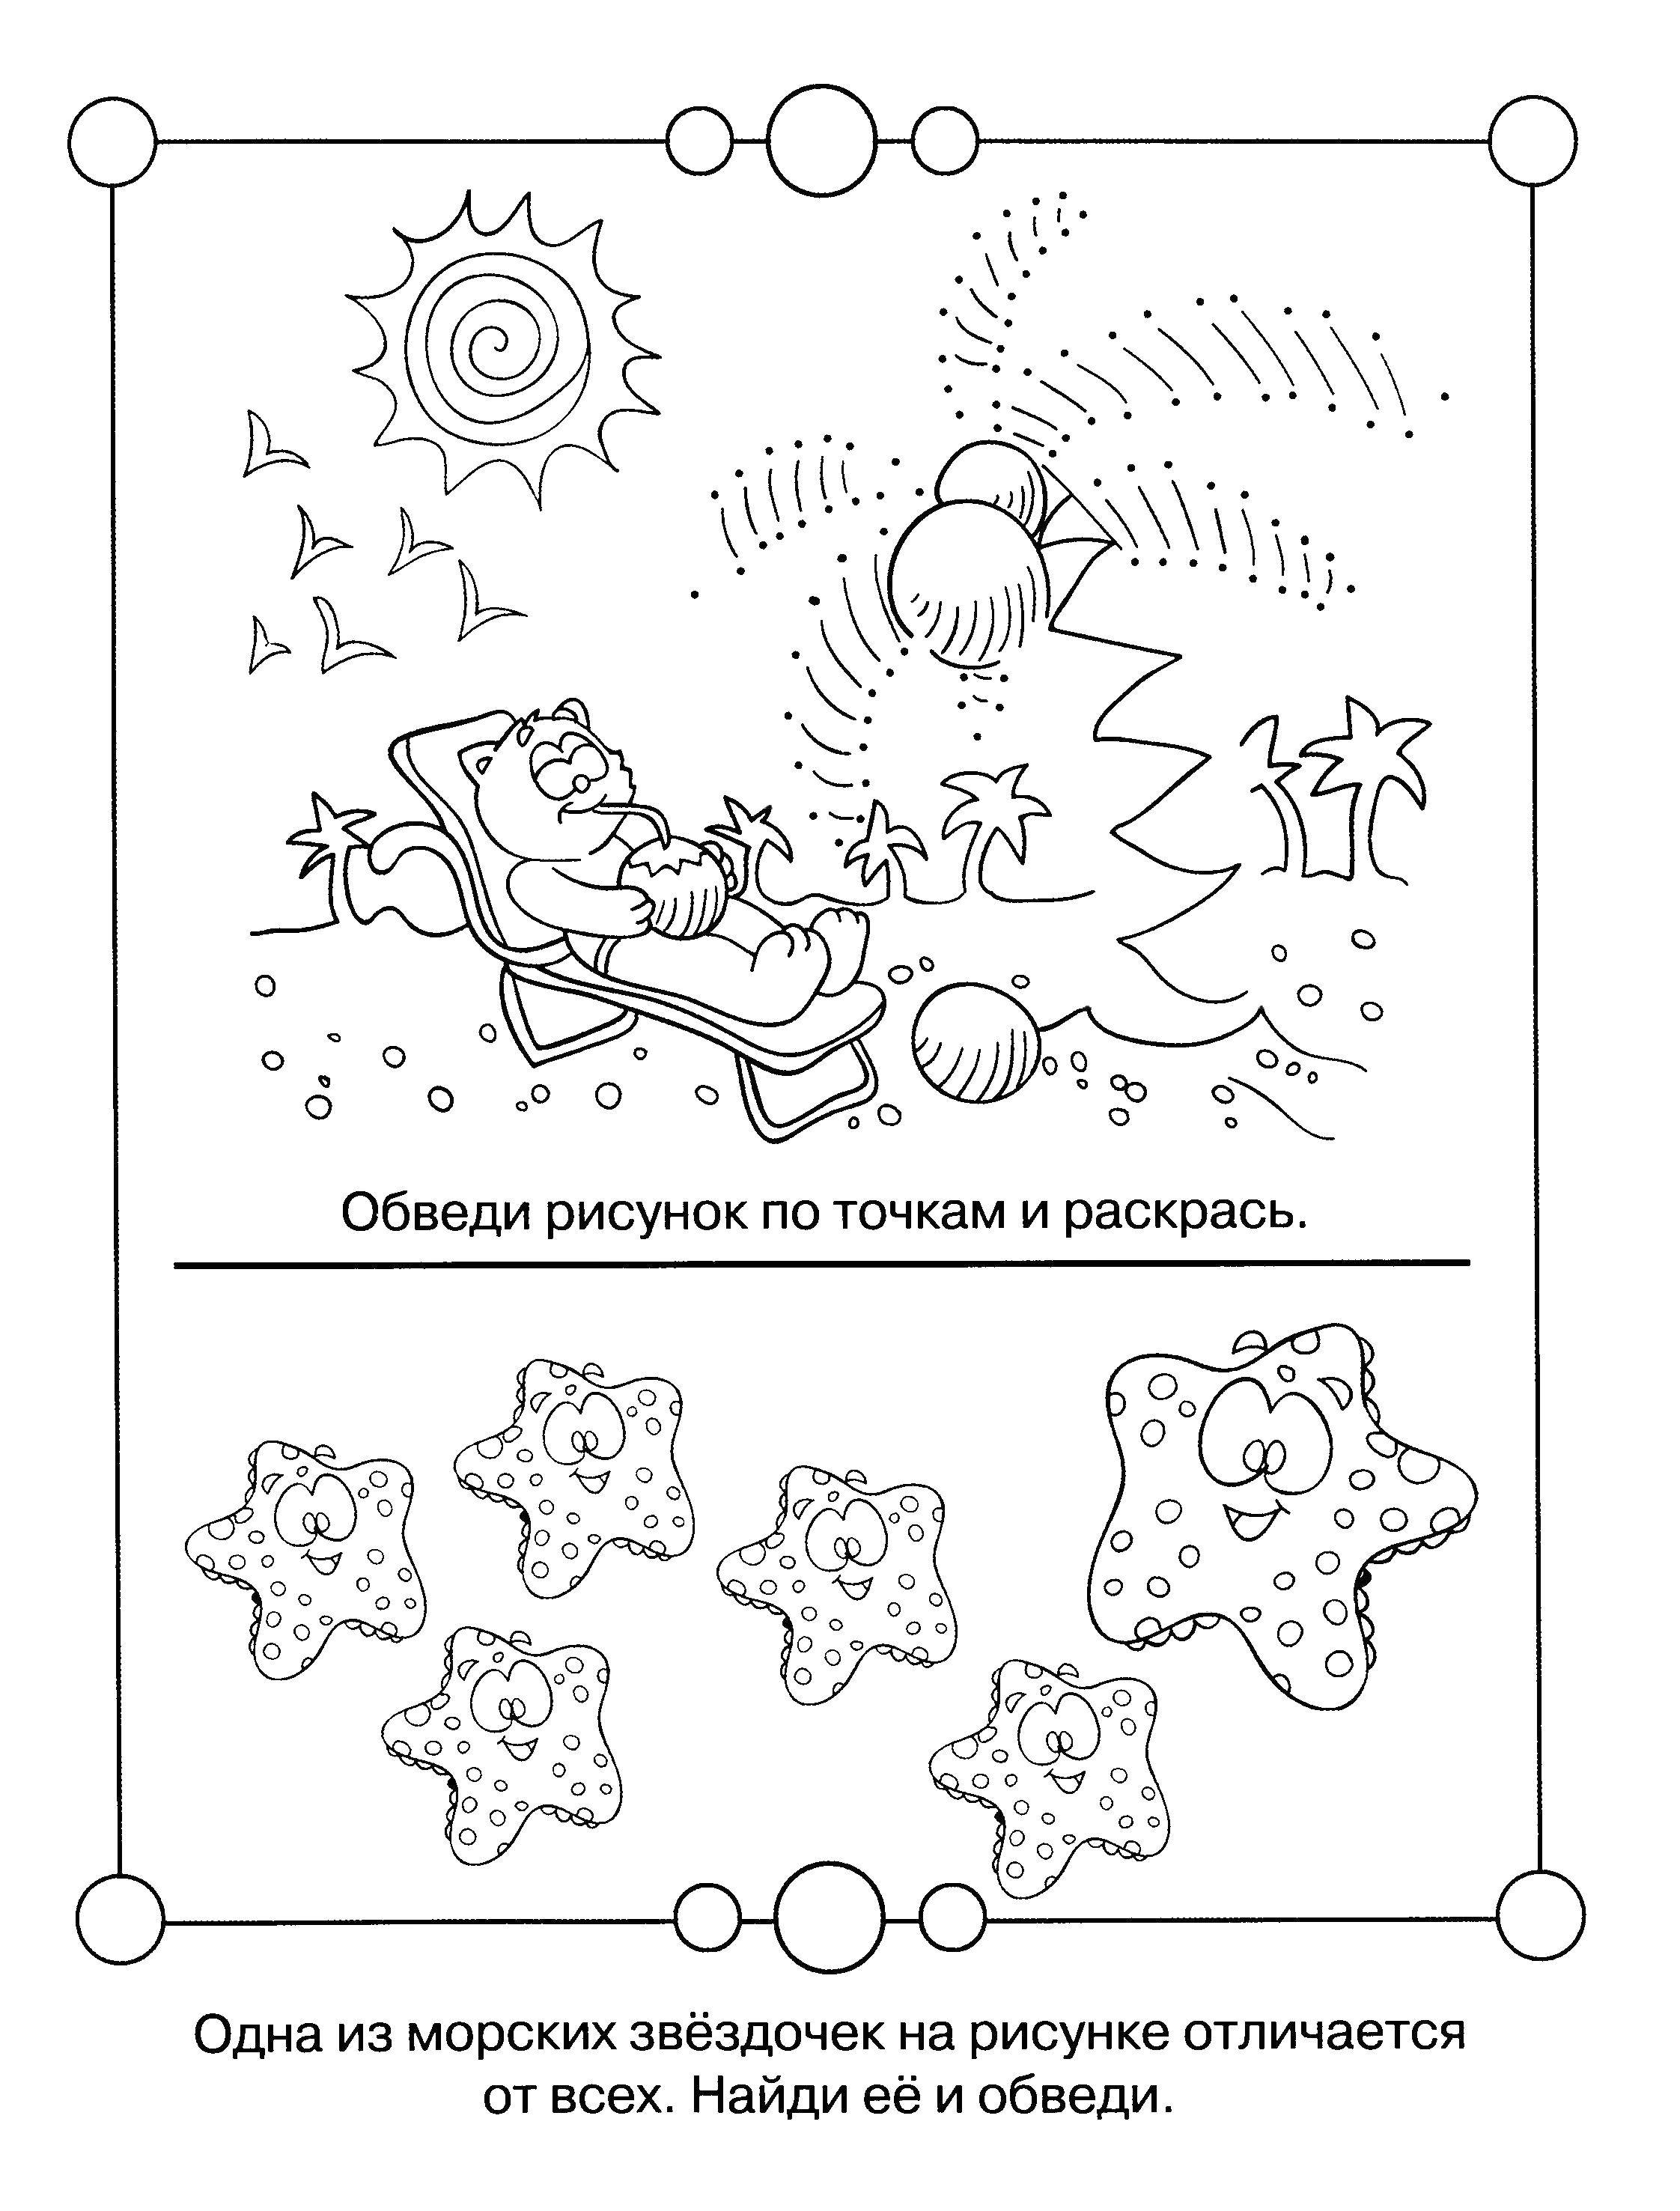 Coloring Trace the contour and color.. Category riddles for kids. Tags:  Pattern , stroke path.